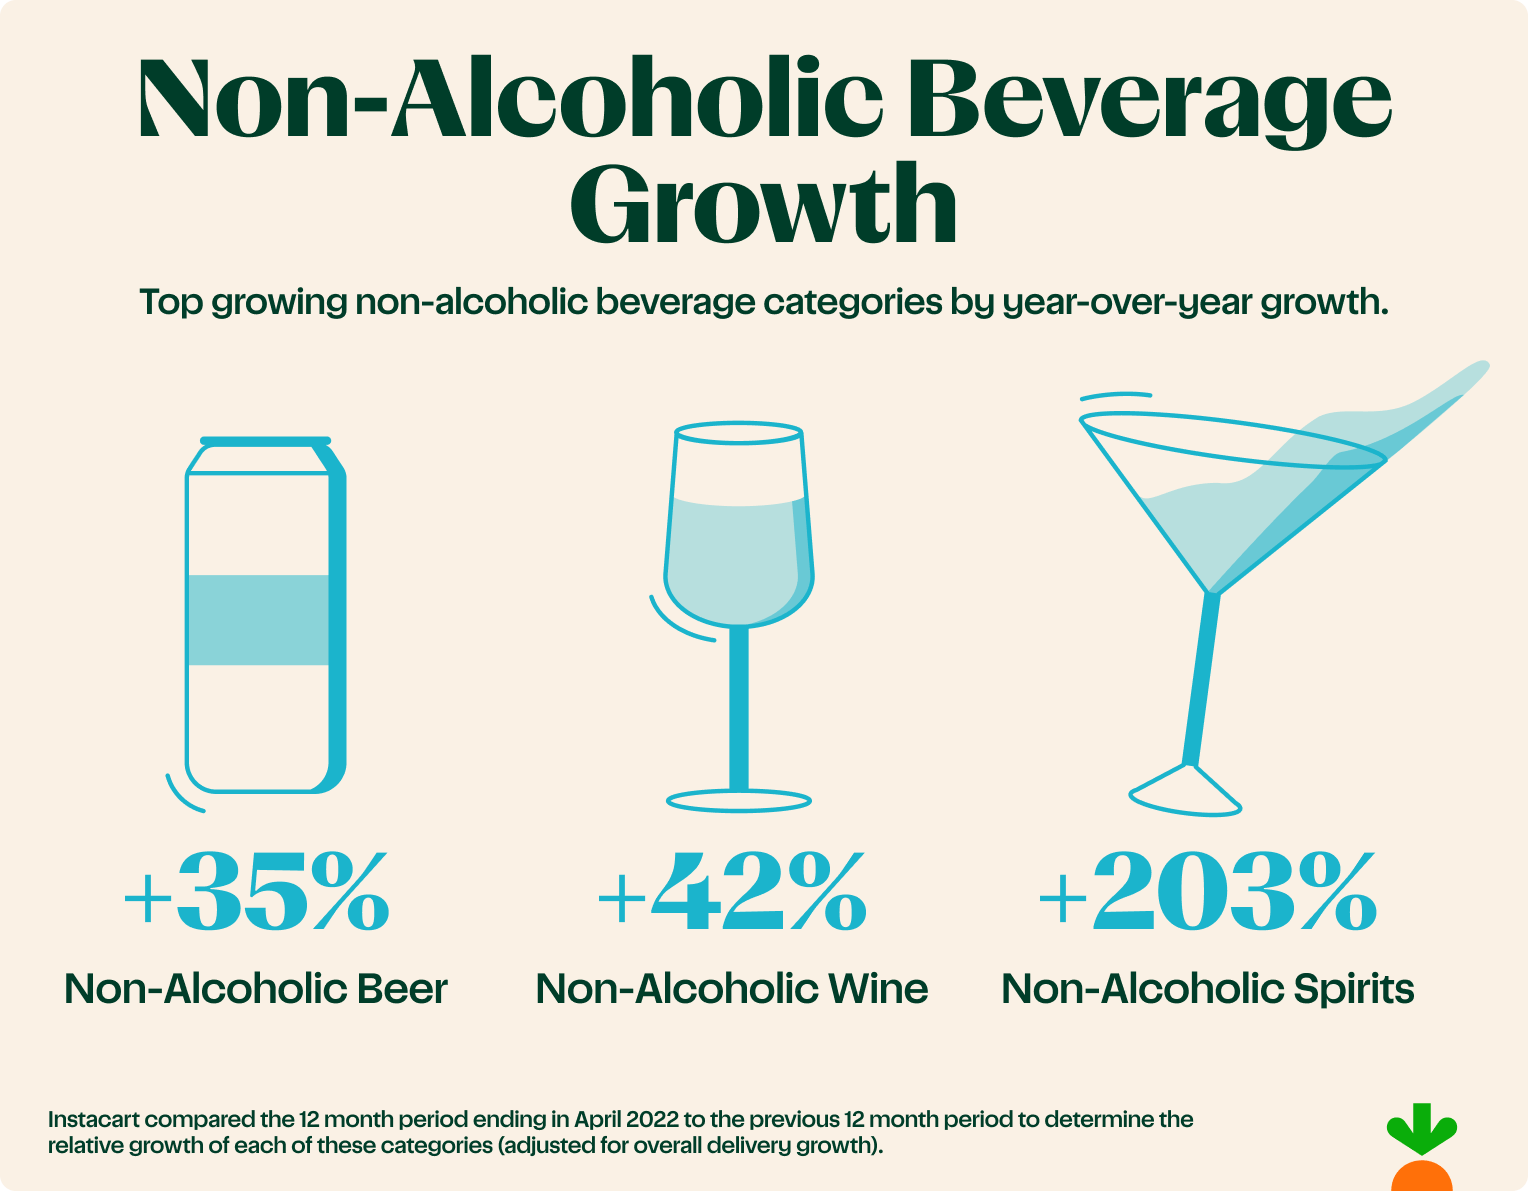 Non-Alcoholic Beverage Growth 